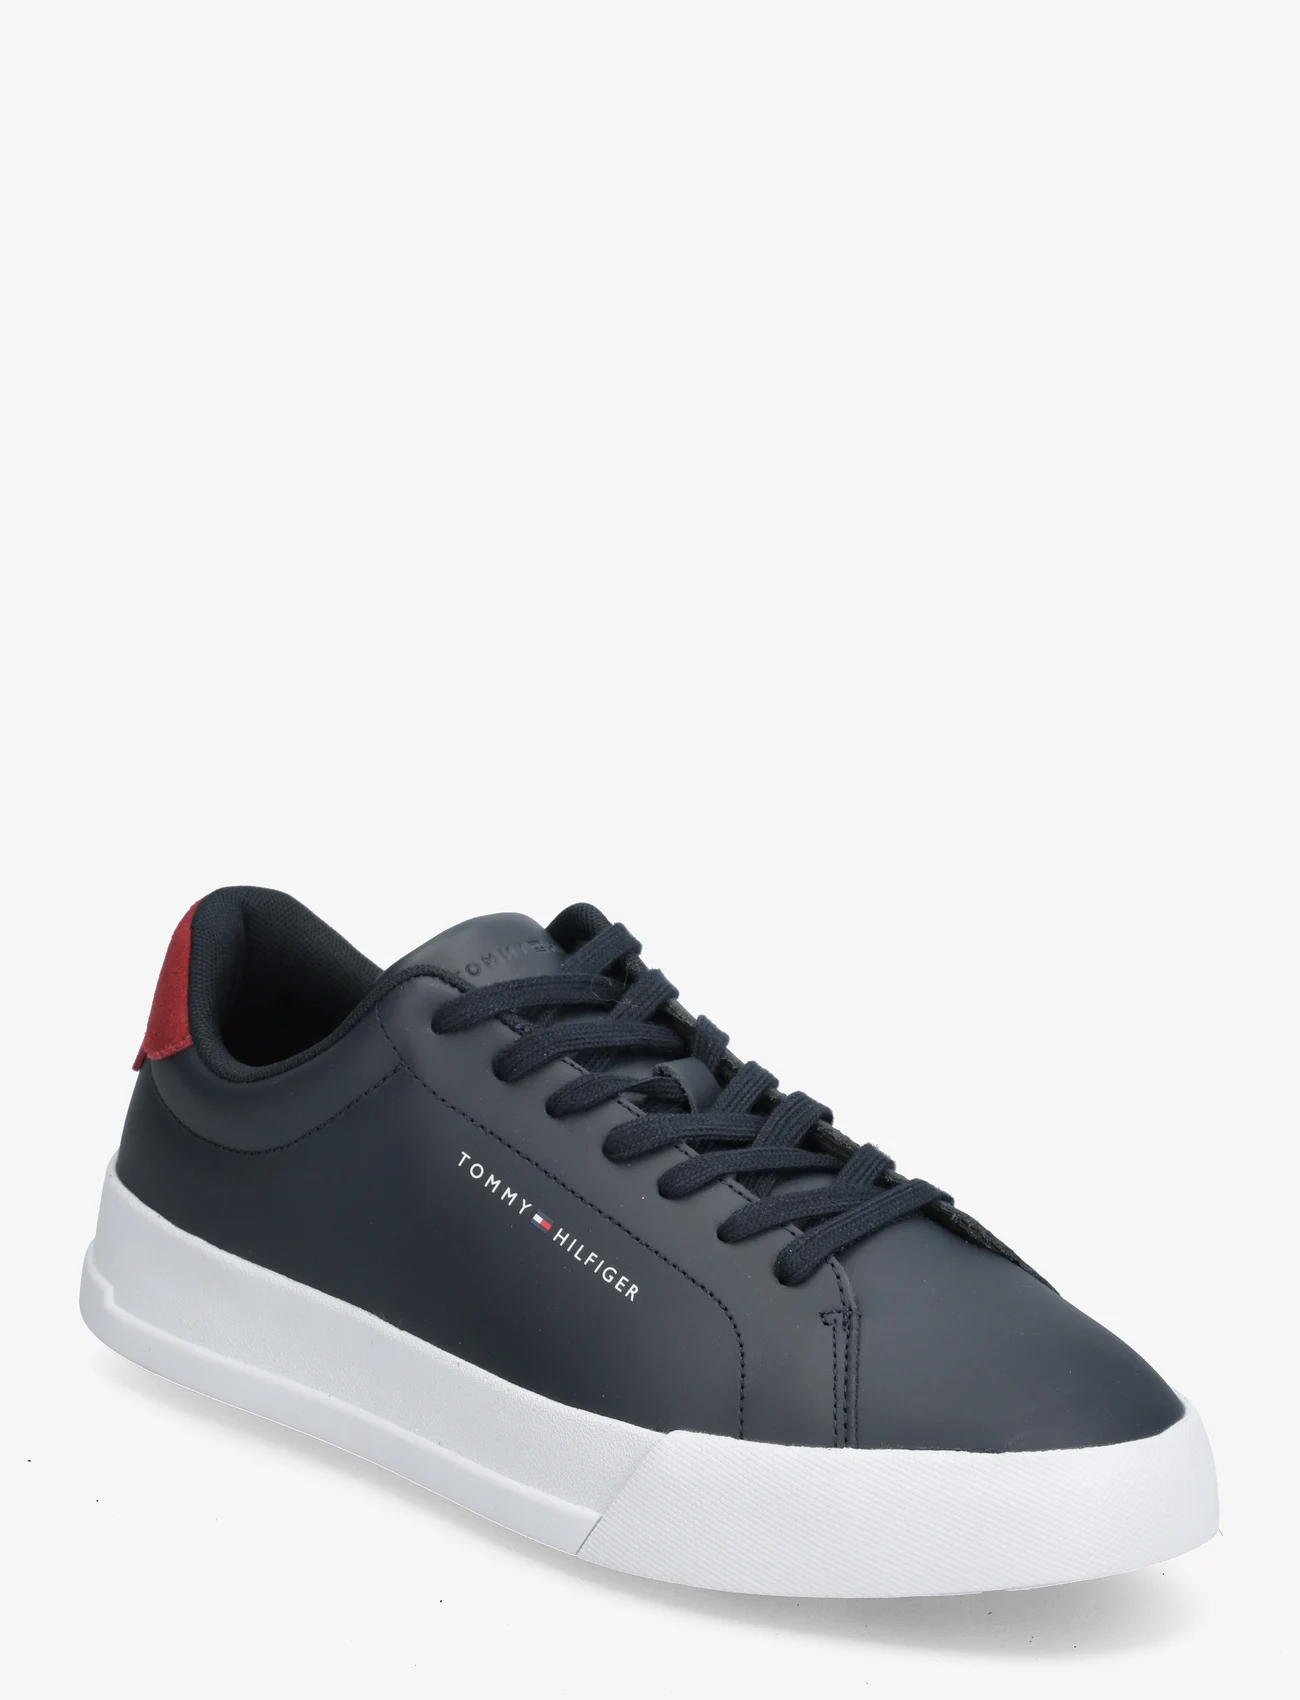 Tommy Hilfiger - TH COURT LEATHER - laag sneakers - desert sky - 0